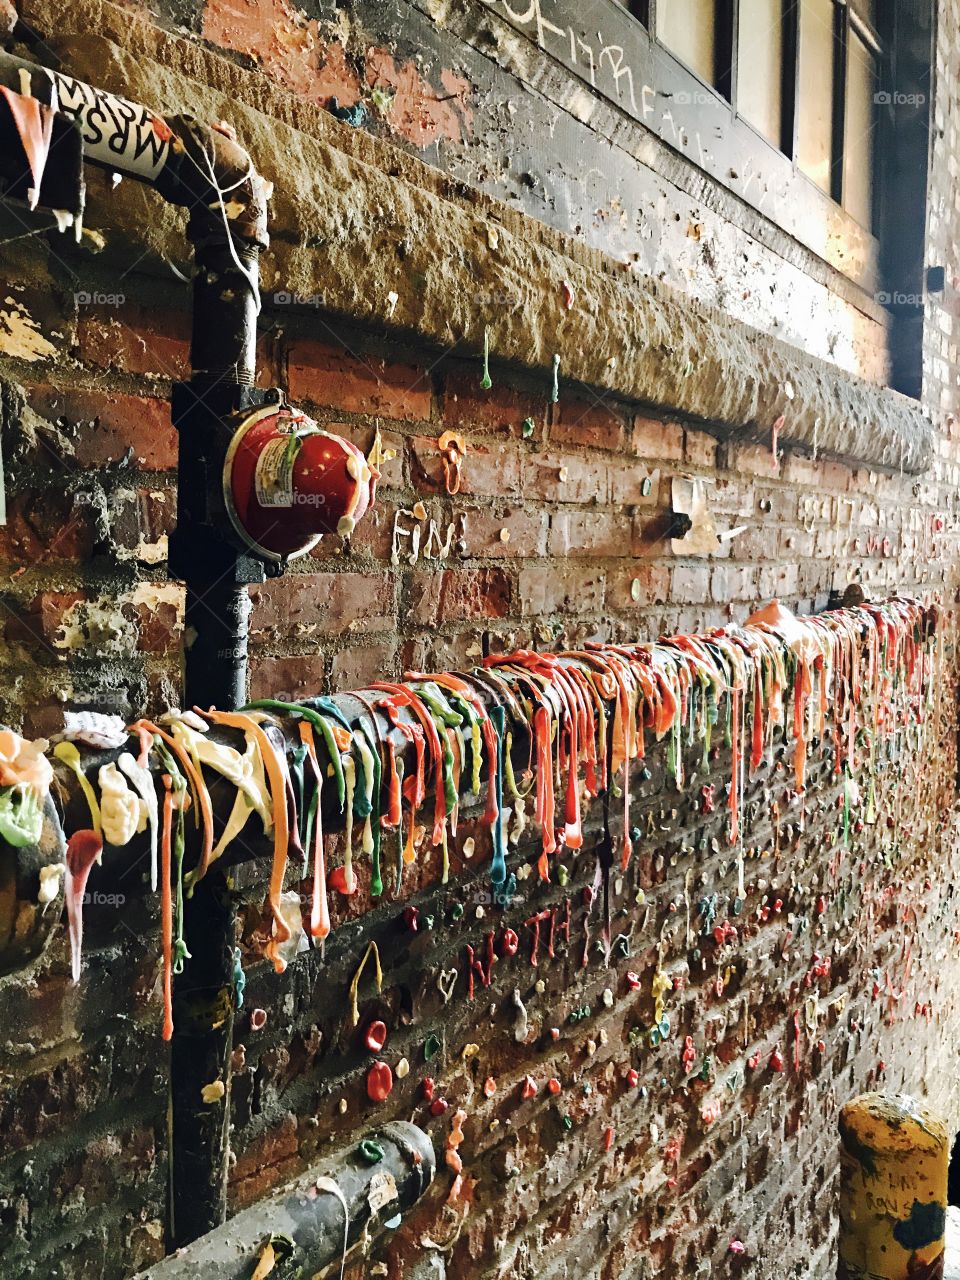 Seattle's Chewing gum wall